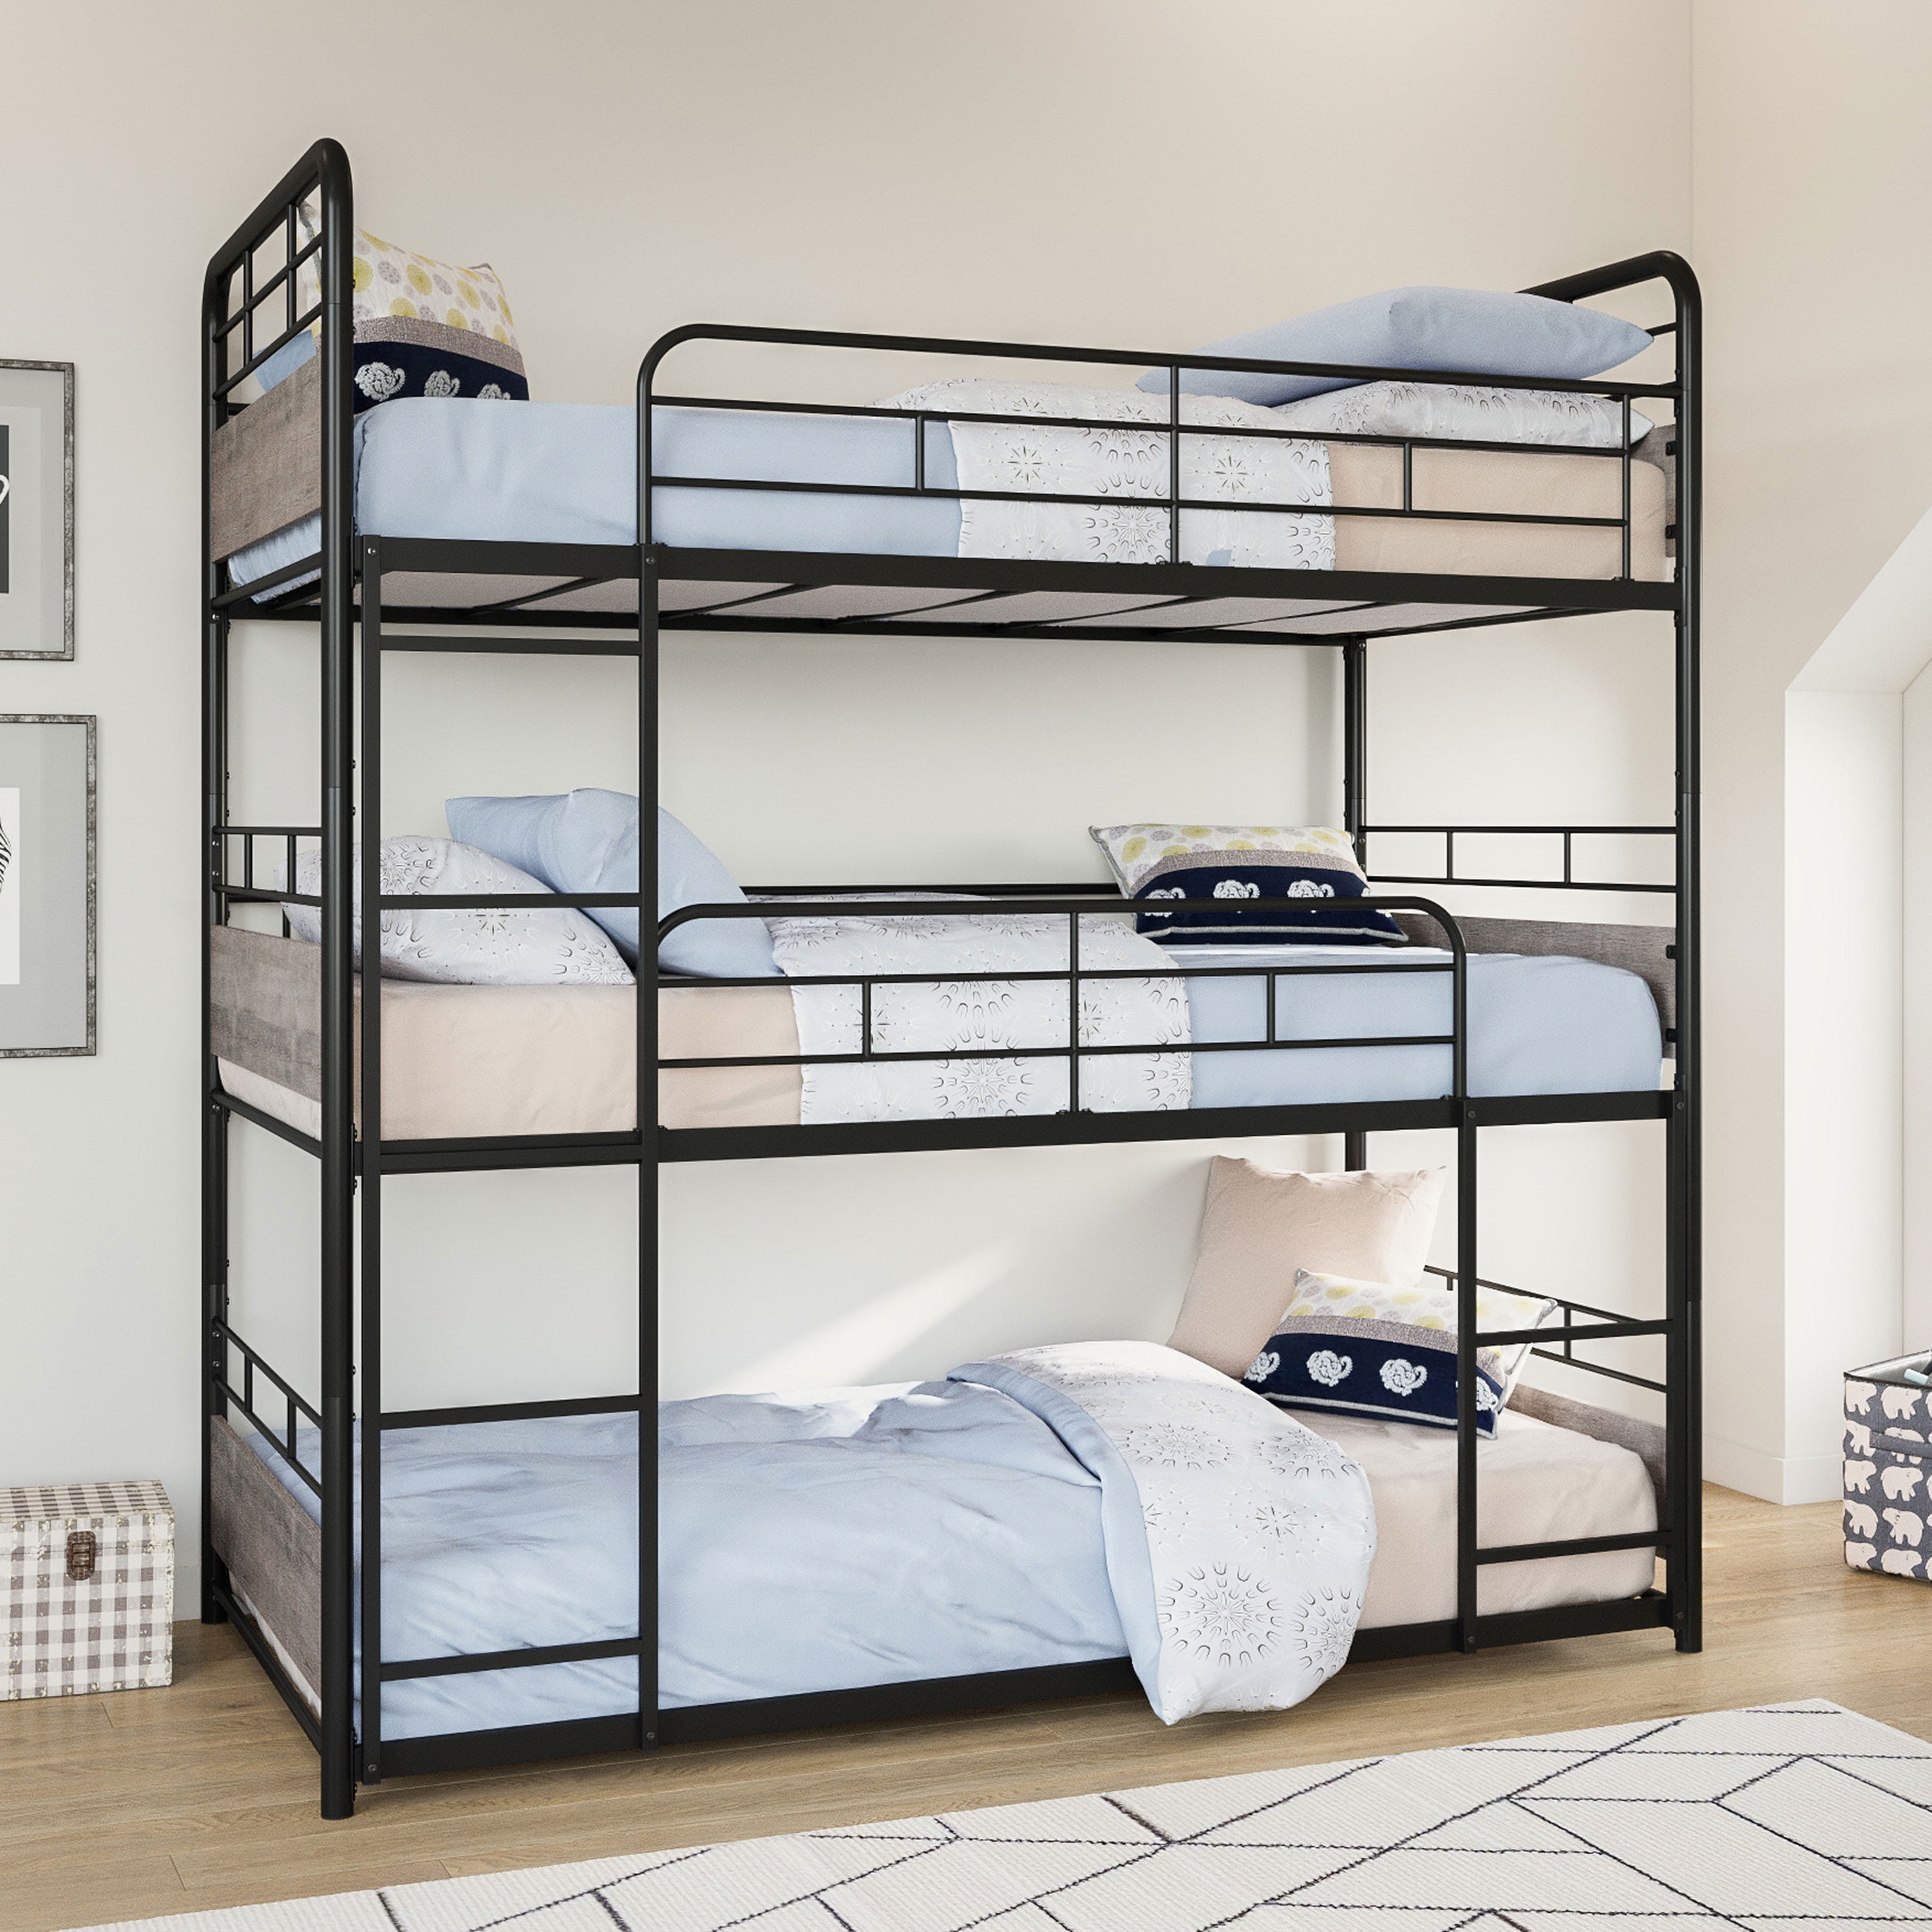 Better Homes Gardens Anniston Triple, Cream Colored Bunk Beds